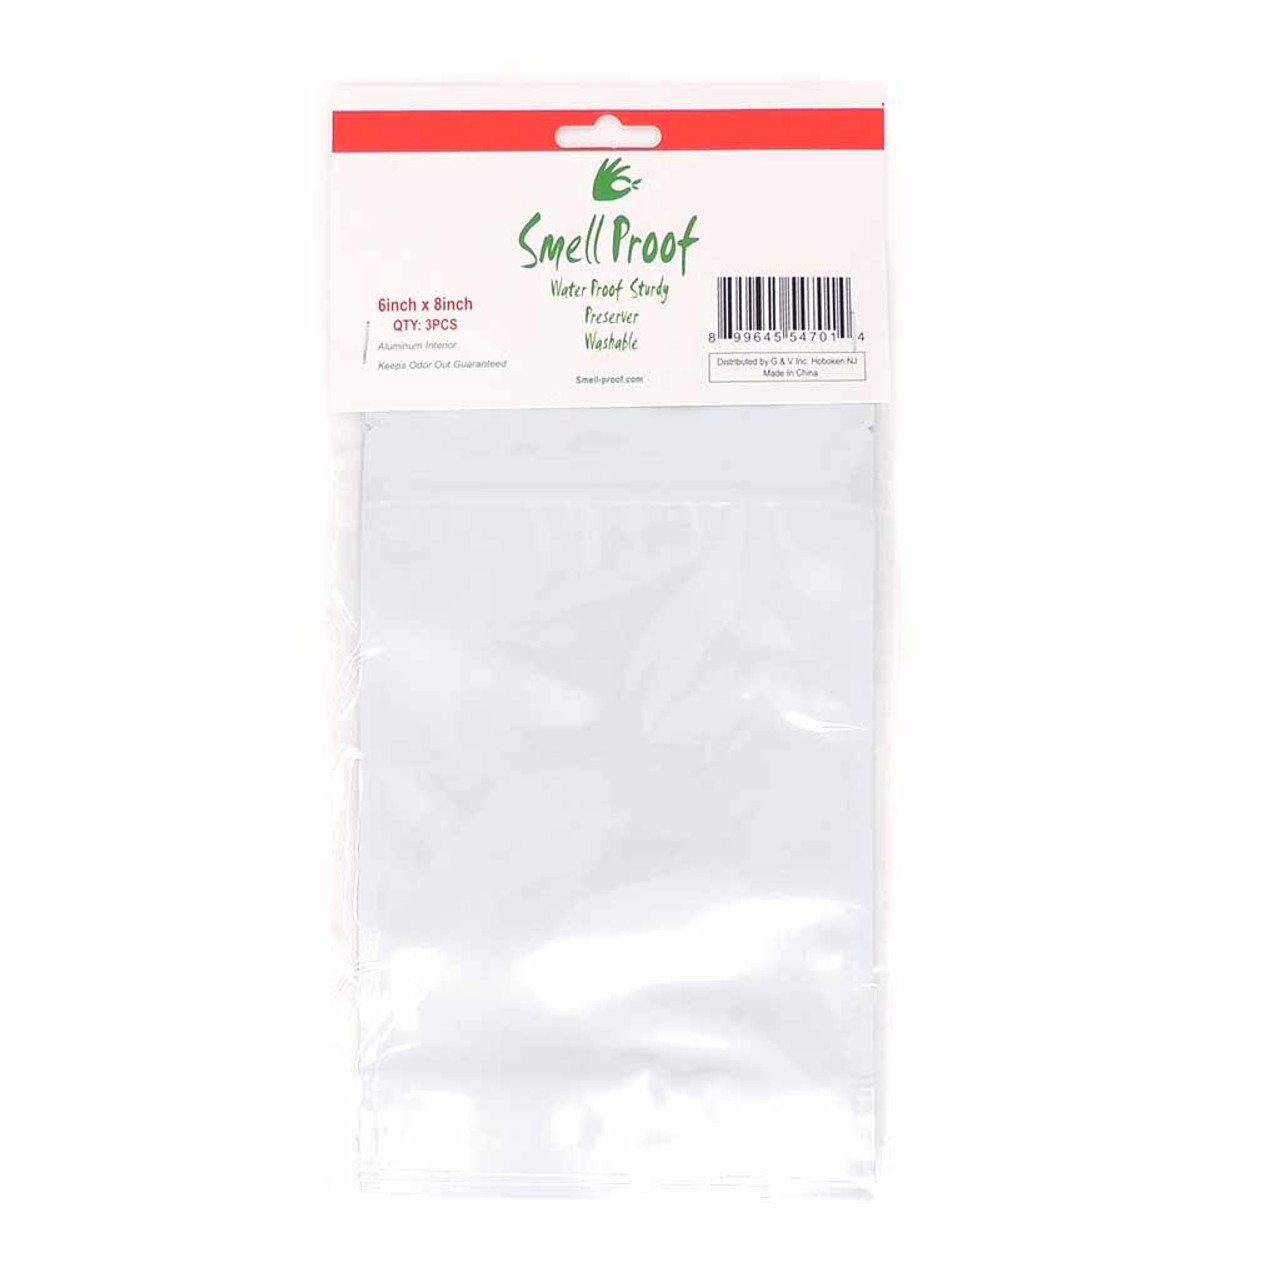 Smell Proof Bags 3 ct. - 6" x 8" - White
UNS Wholesale
Smoke Shop Distributor
Head Shop Novelty Supplies